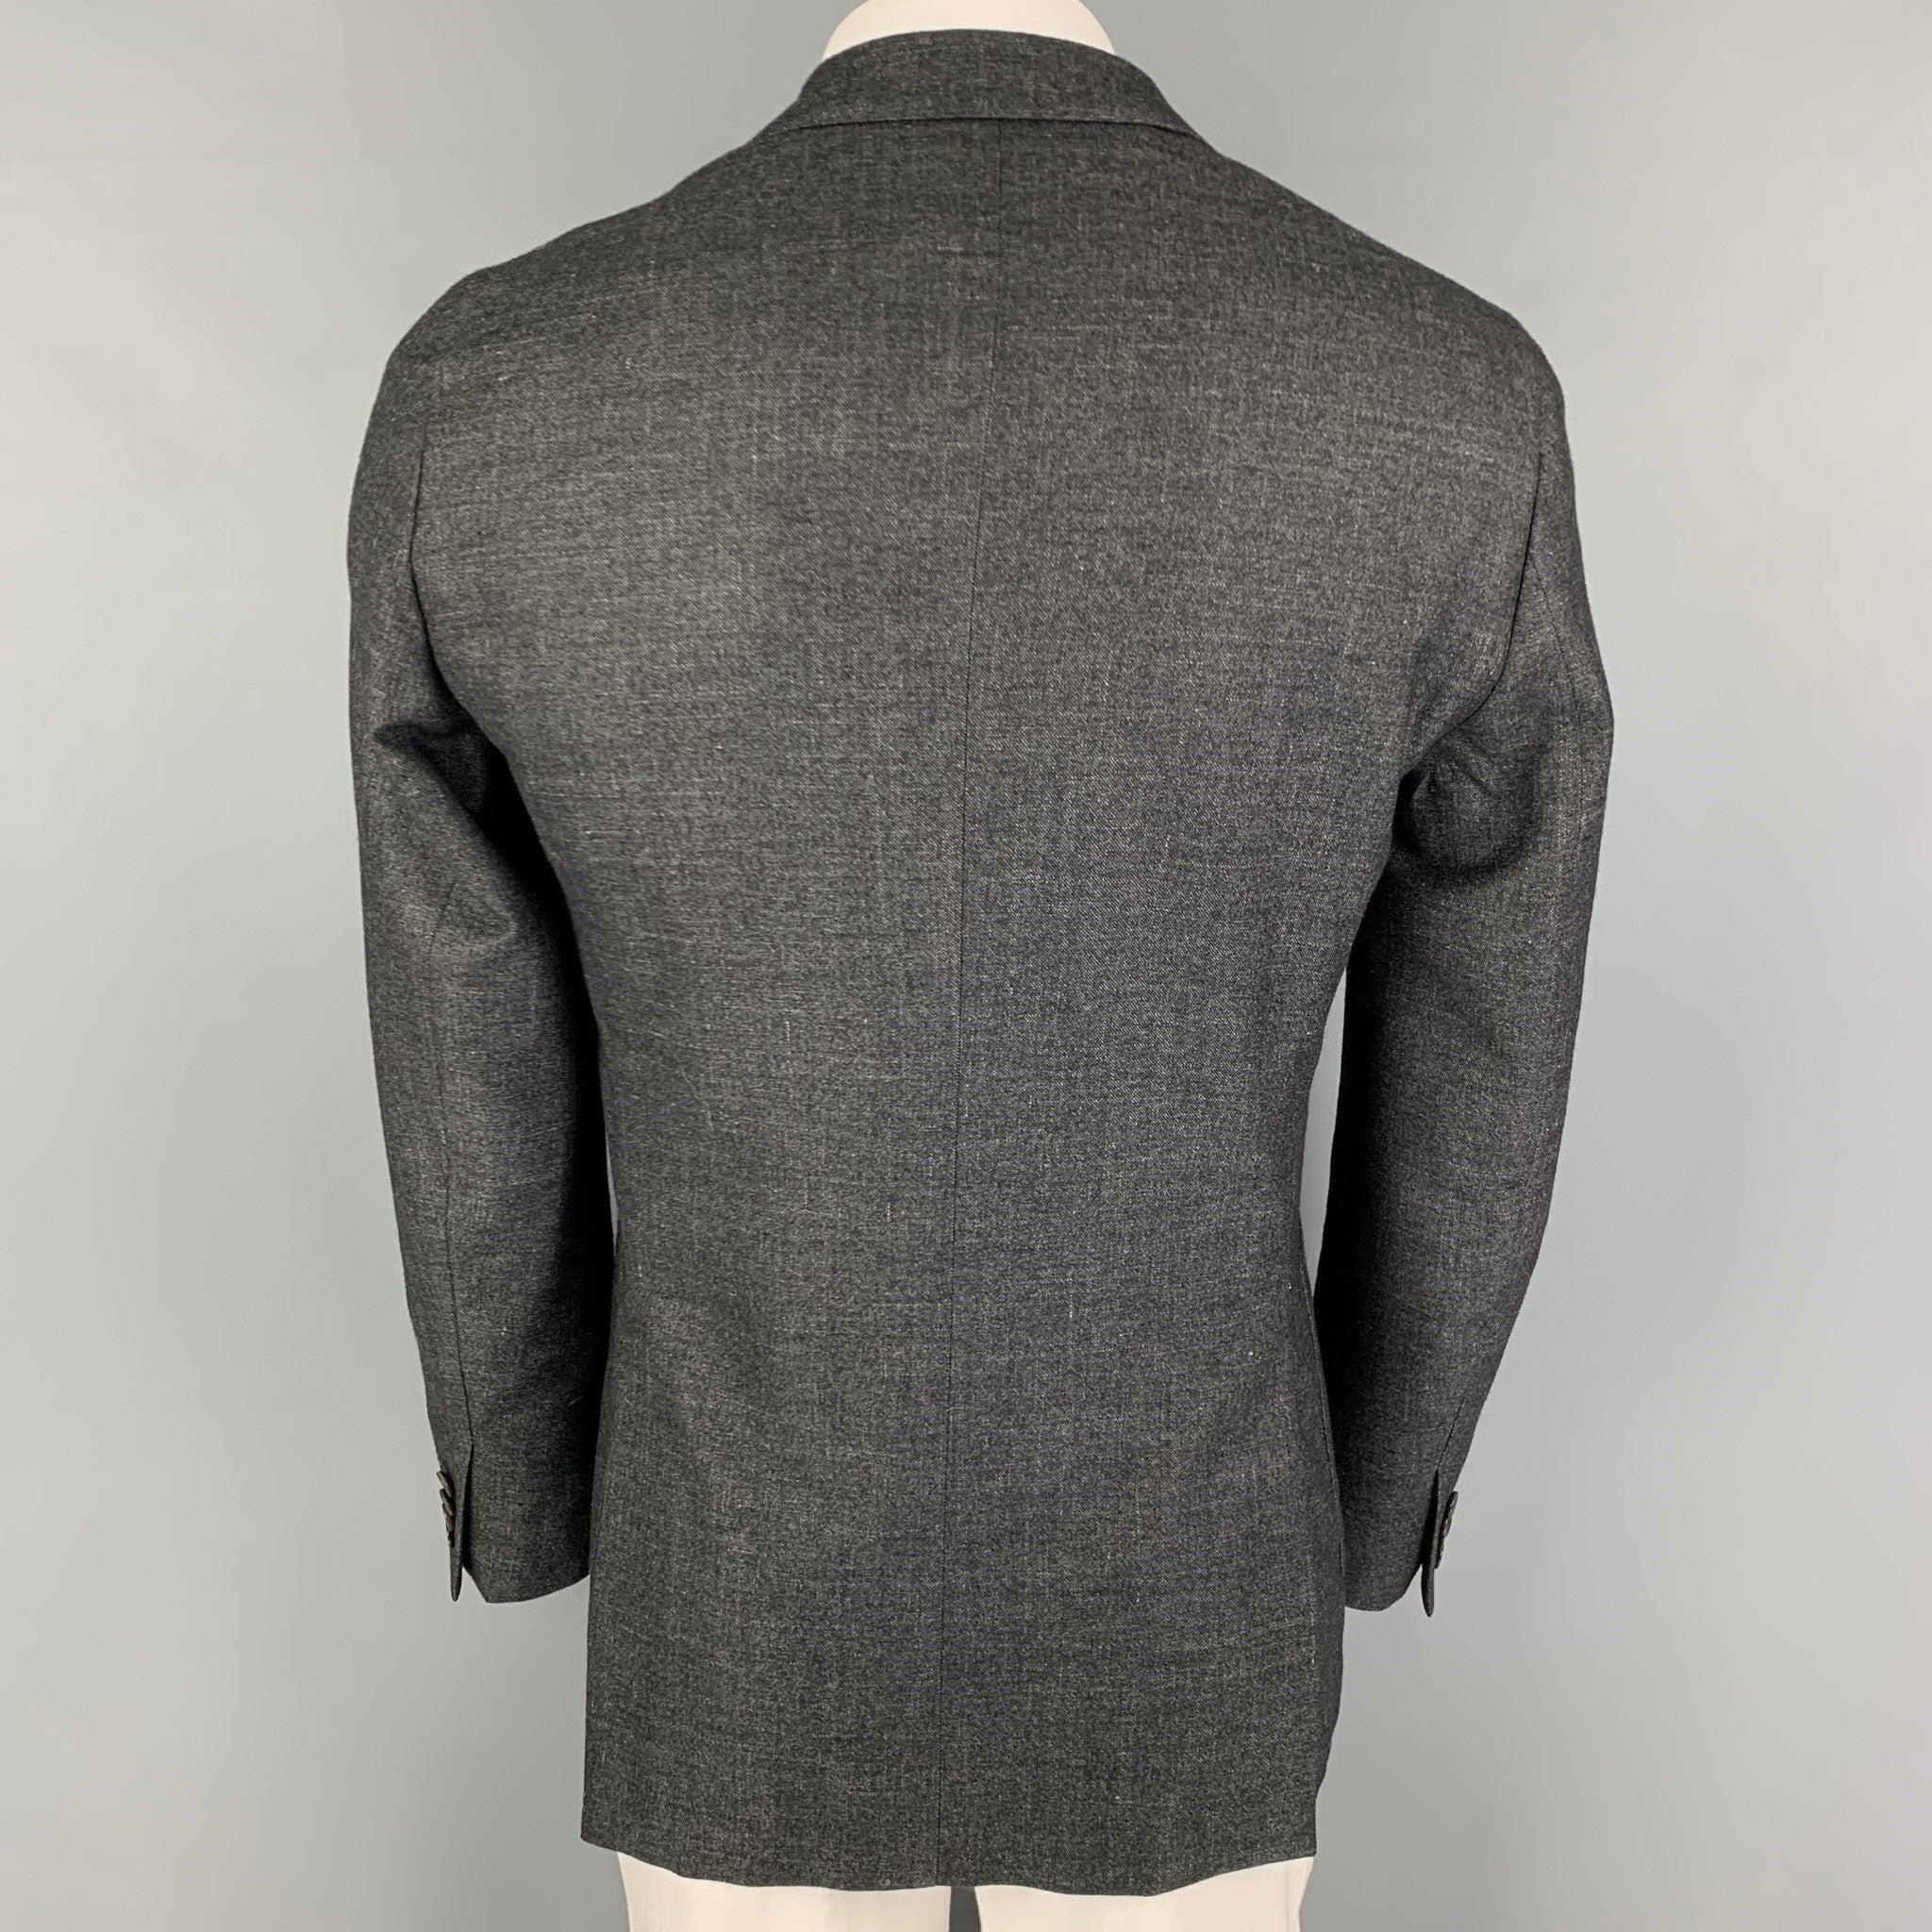 BOGLIOLI Size M Grey Charcoal Wool Blend Single Breasted Sport Coat In Excellent Condition For Sale In San Francisco, CA